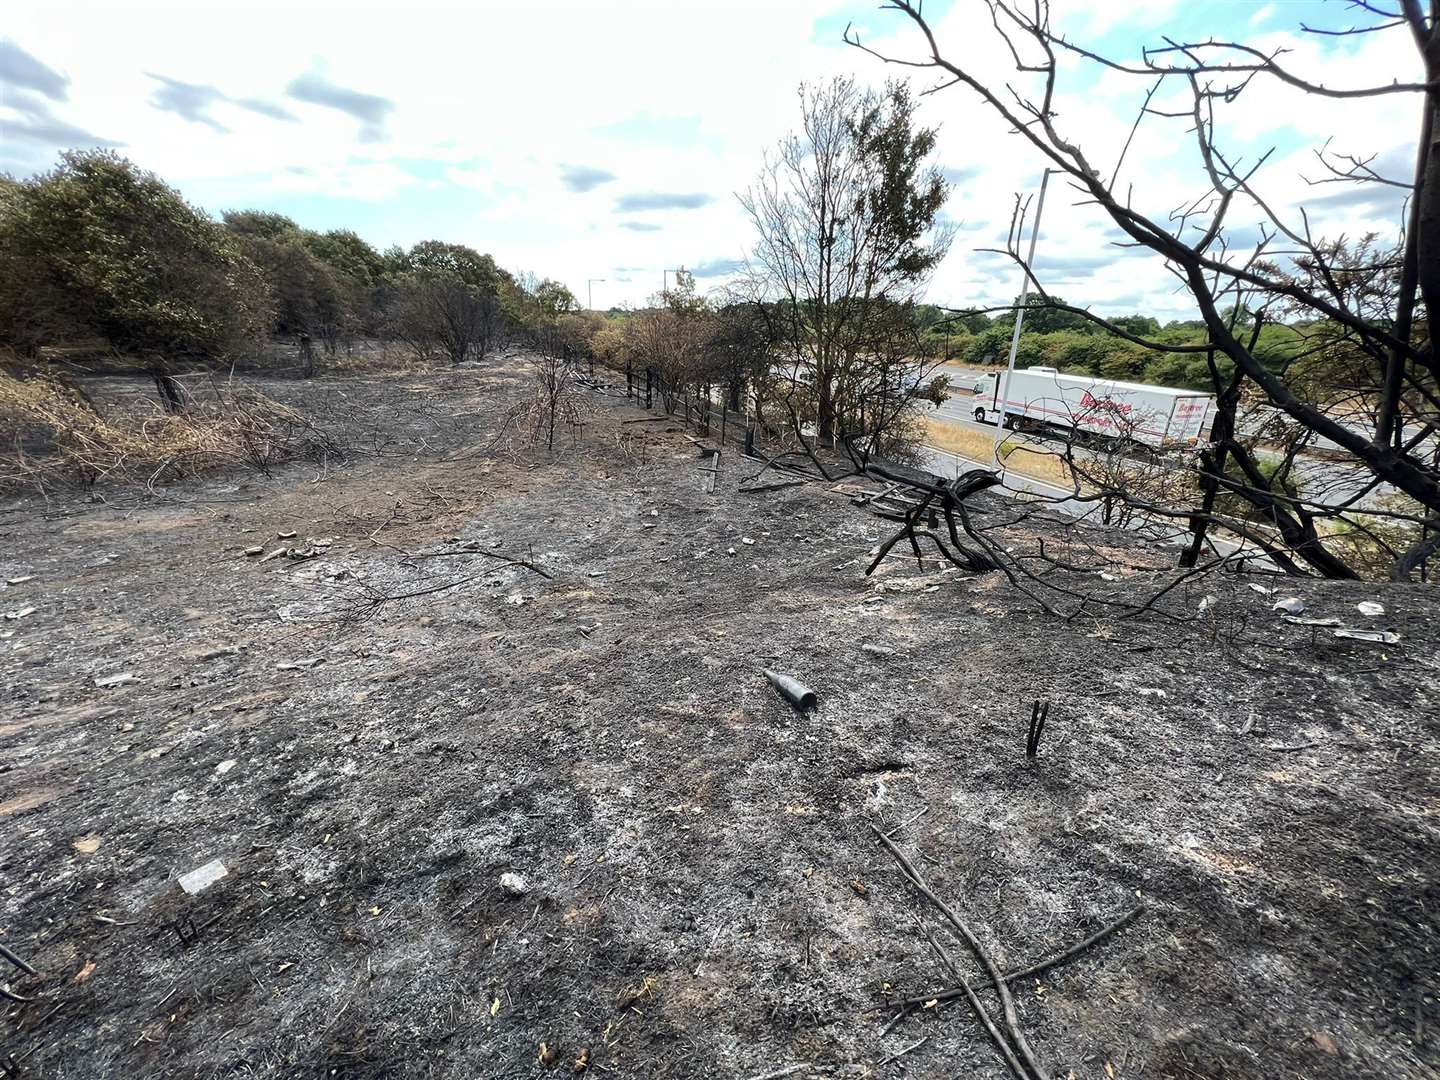 Aftermath of the fire at Dartford Heath. Pictures: Barry Goodwin